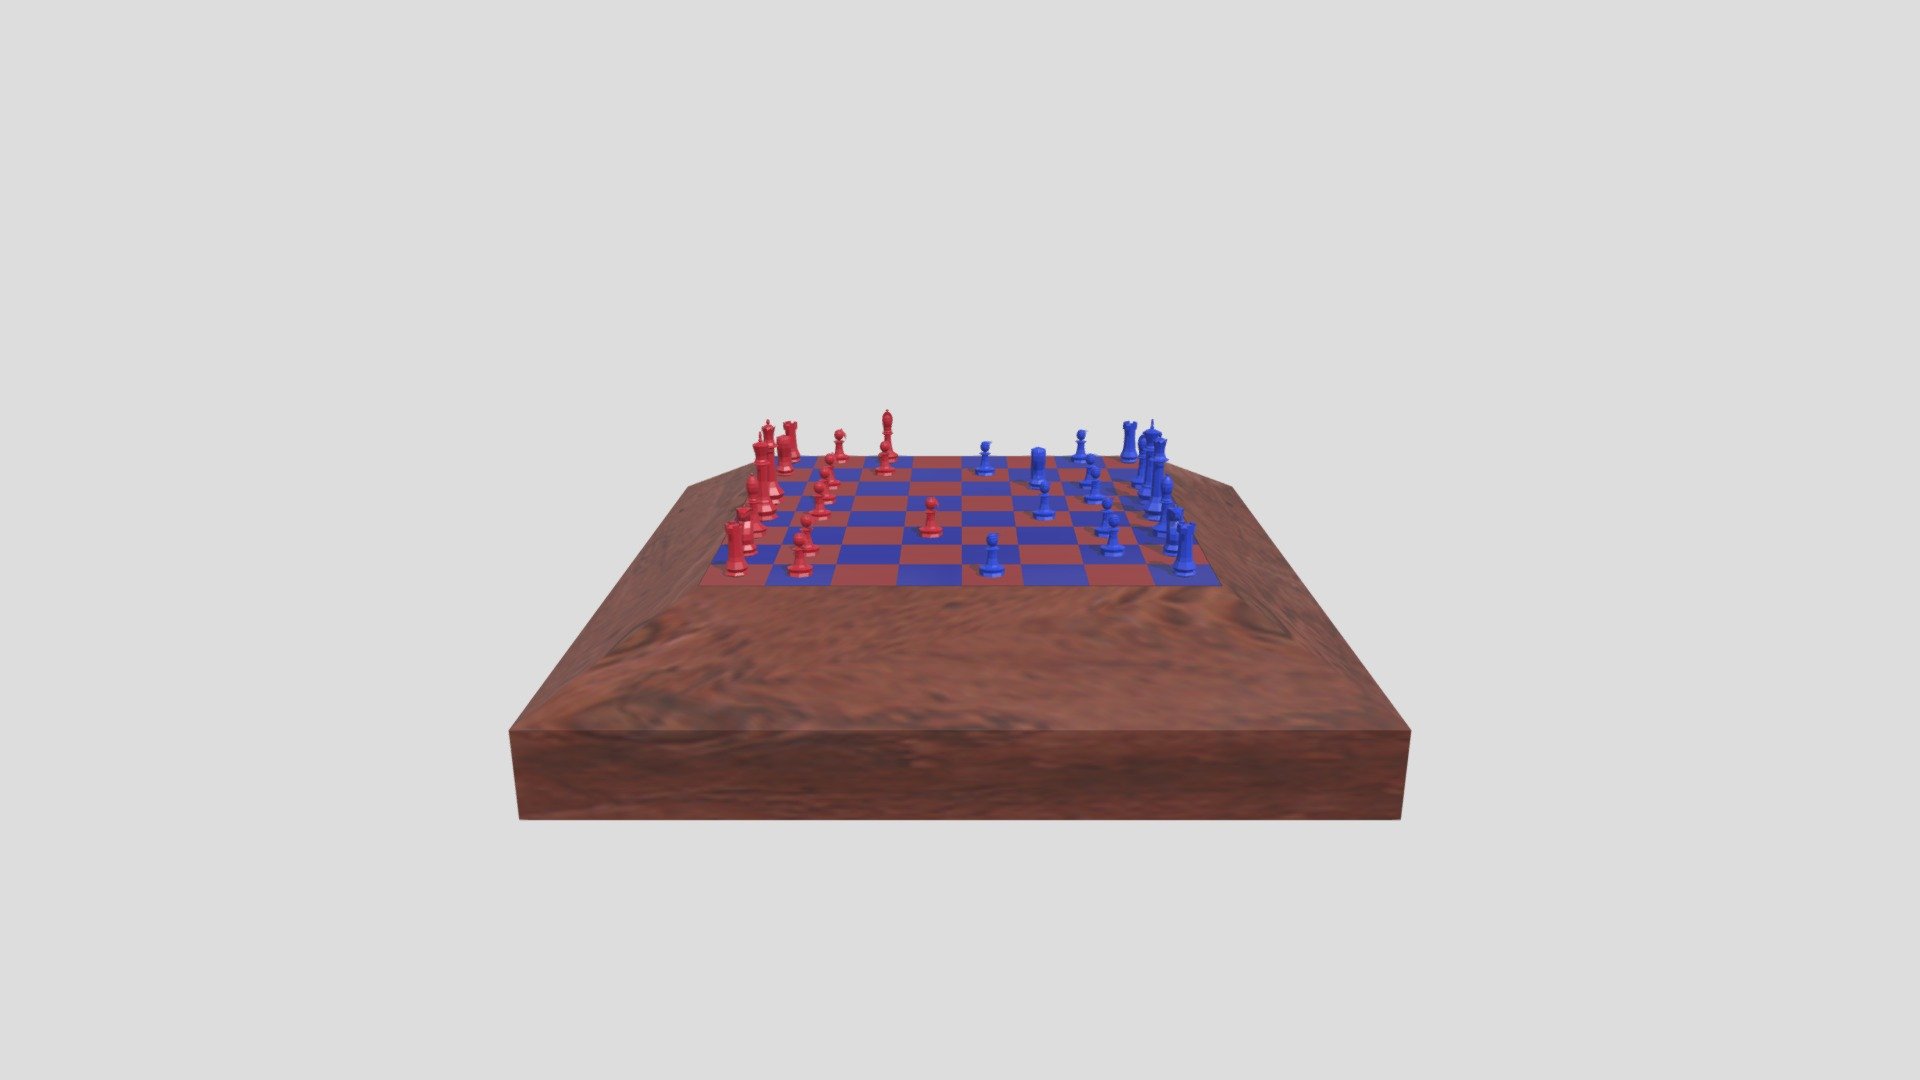 ArtStation - Low poly 3D Chessboard Game assets